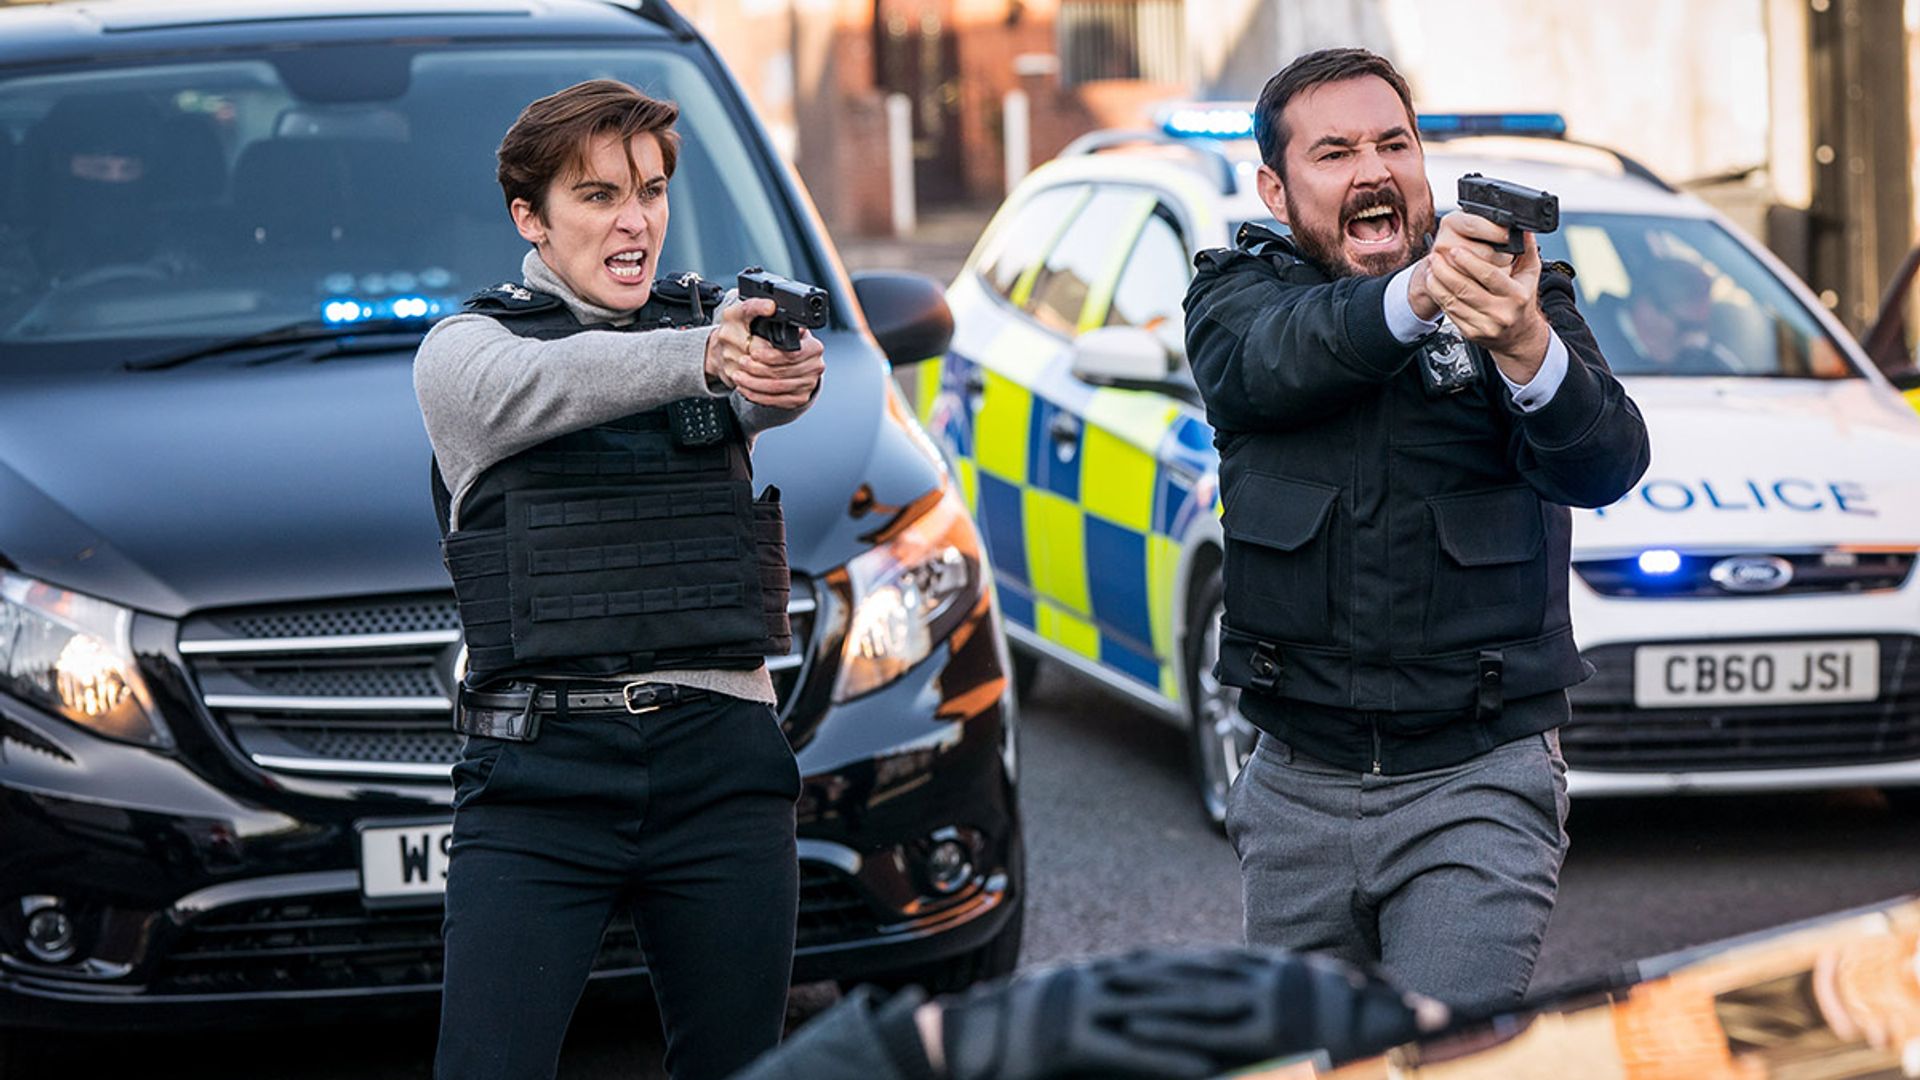 Line of Duty star gives major update on new drama - and fans are so excited